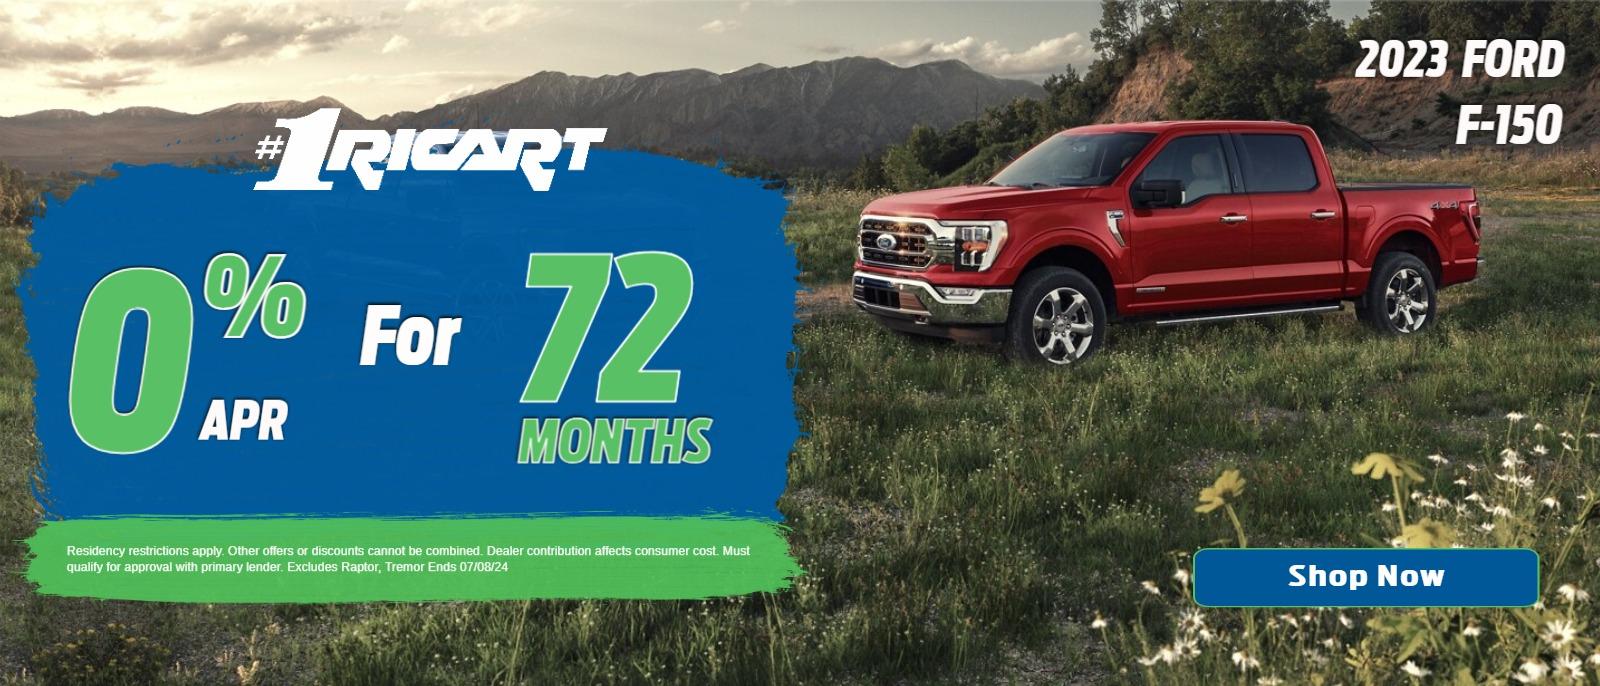 2023 Ford F-150- 0% APR for 72 Months